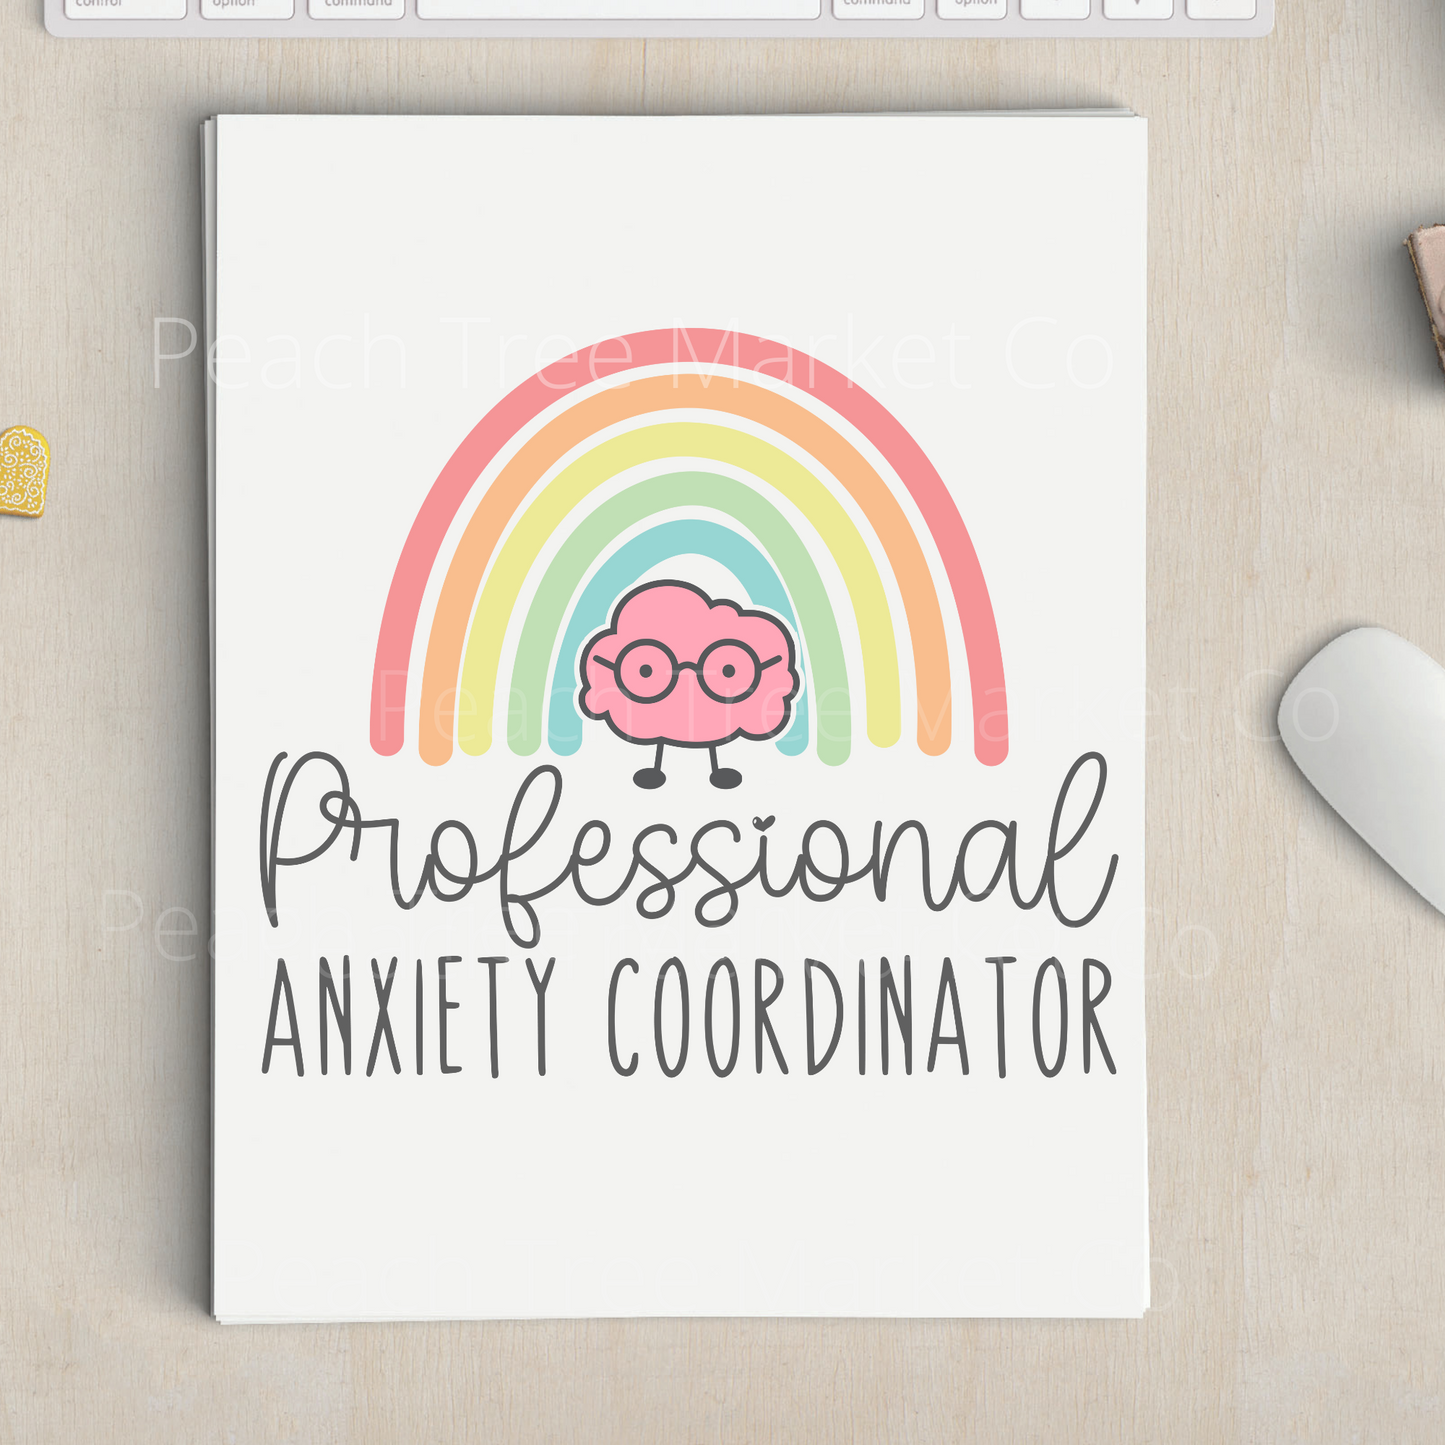 Professional Anxiety Coordinator Sublimation Transfer